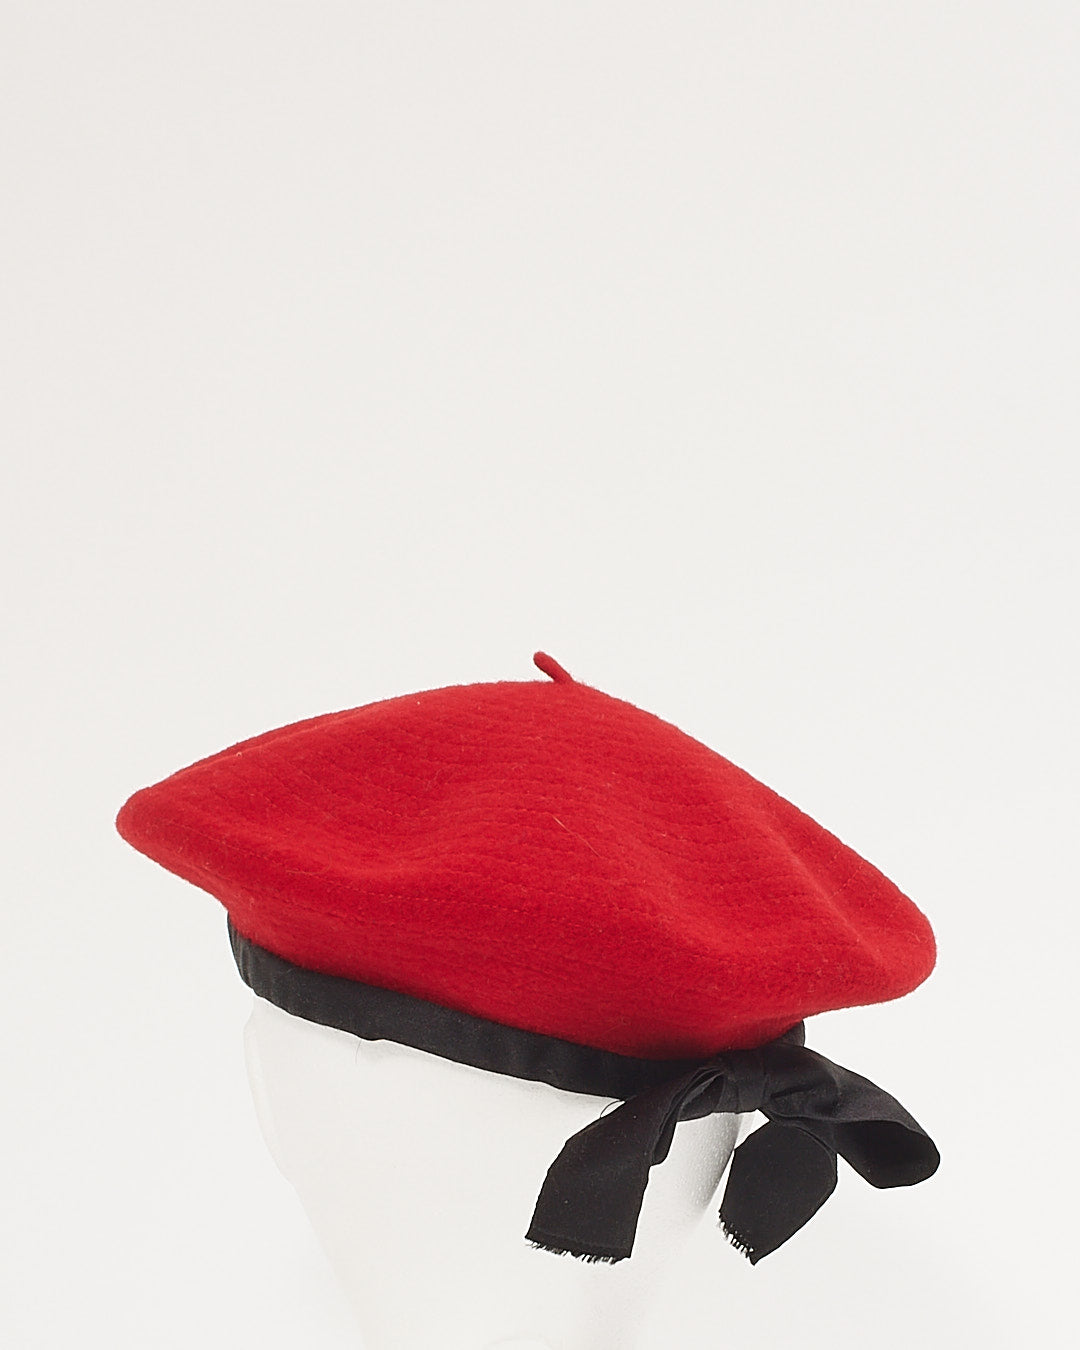 Chanel Red Wool Beret - M